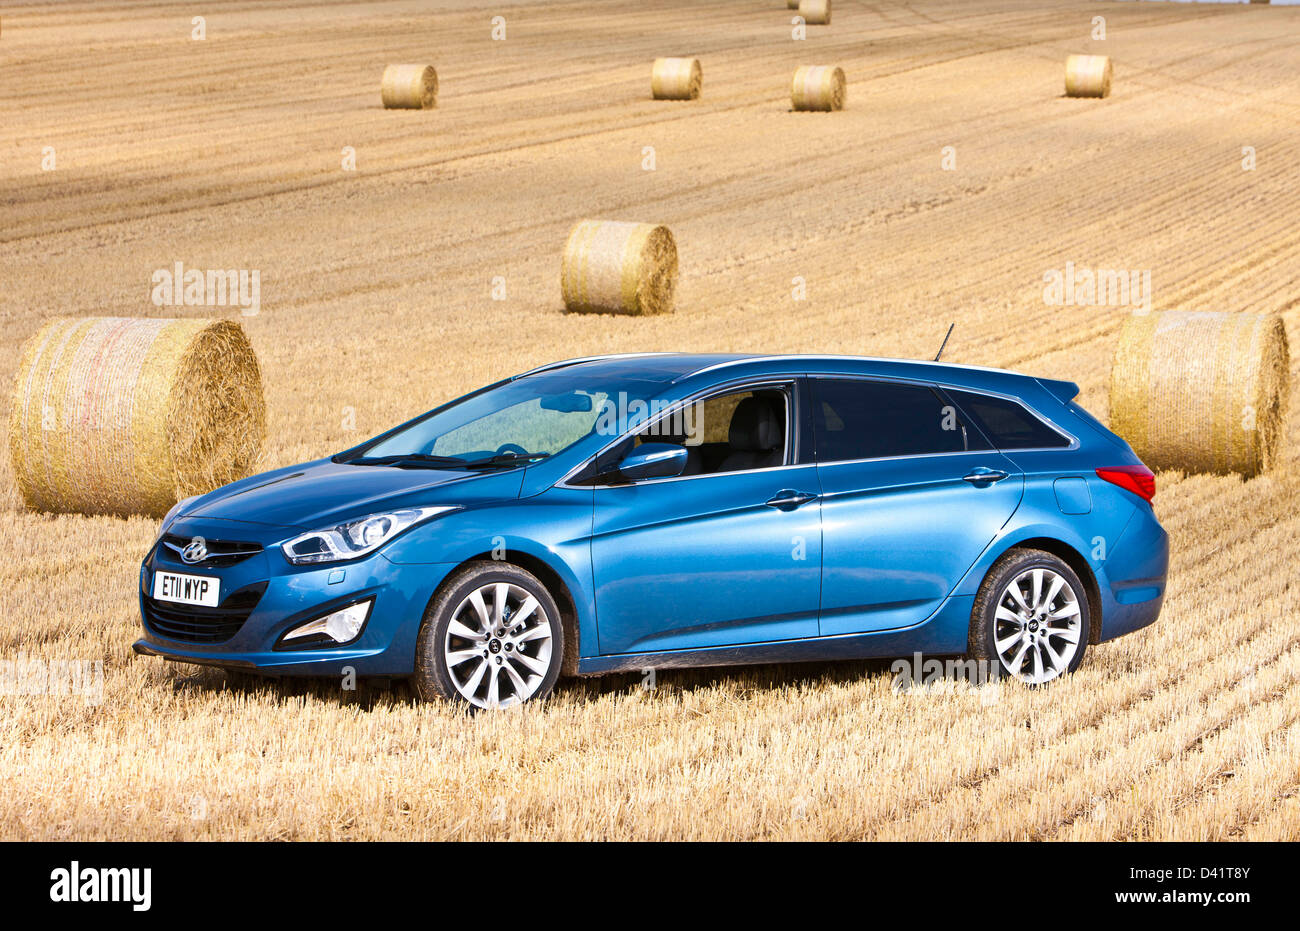 Hyundai I40 High Resolution Stock Photography and Images - Alamy